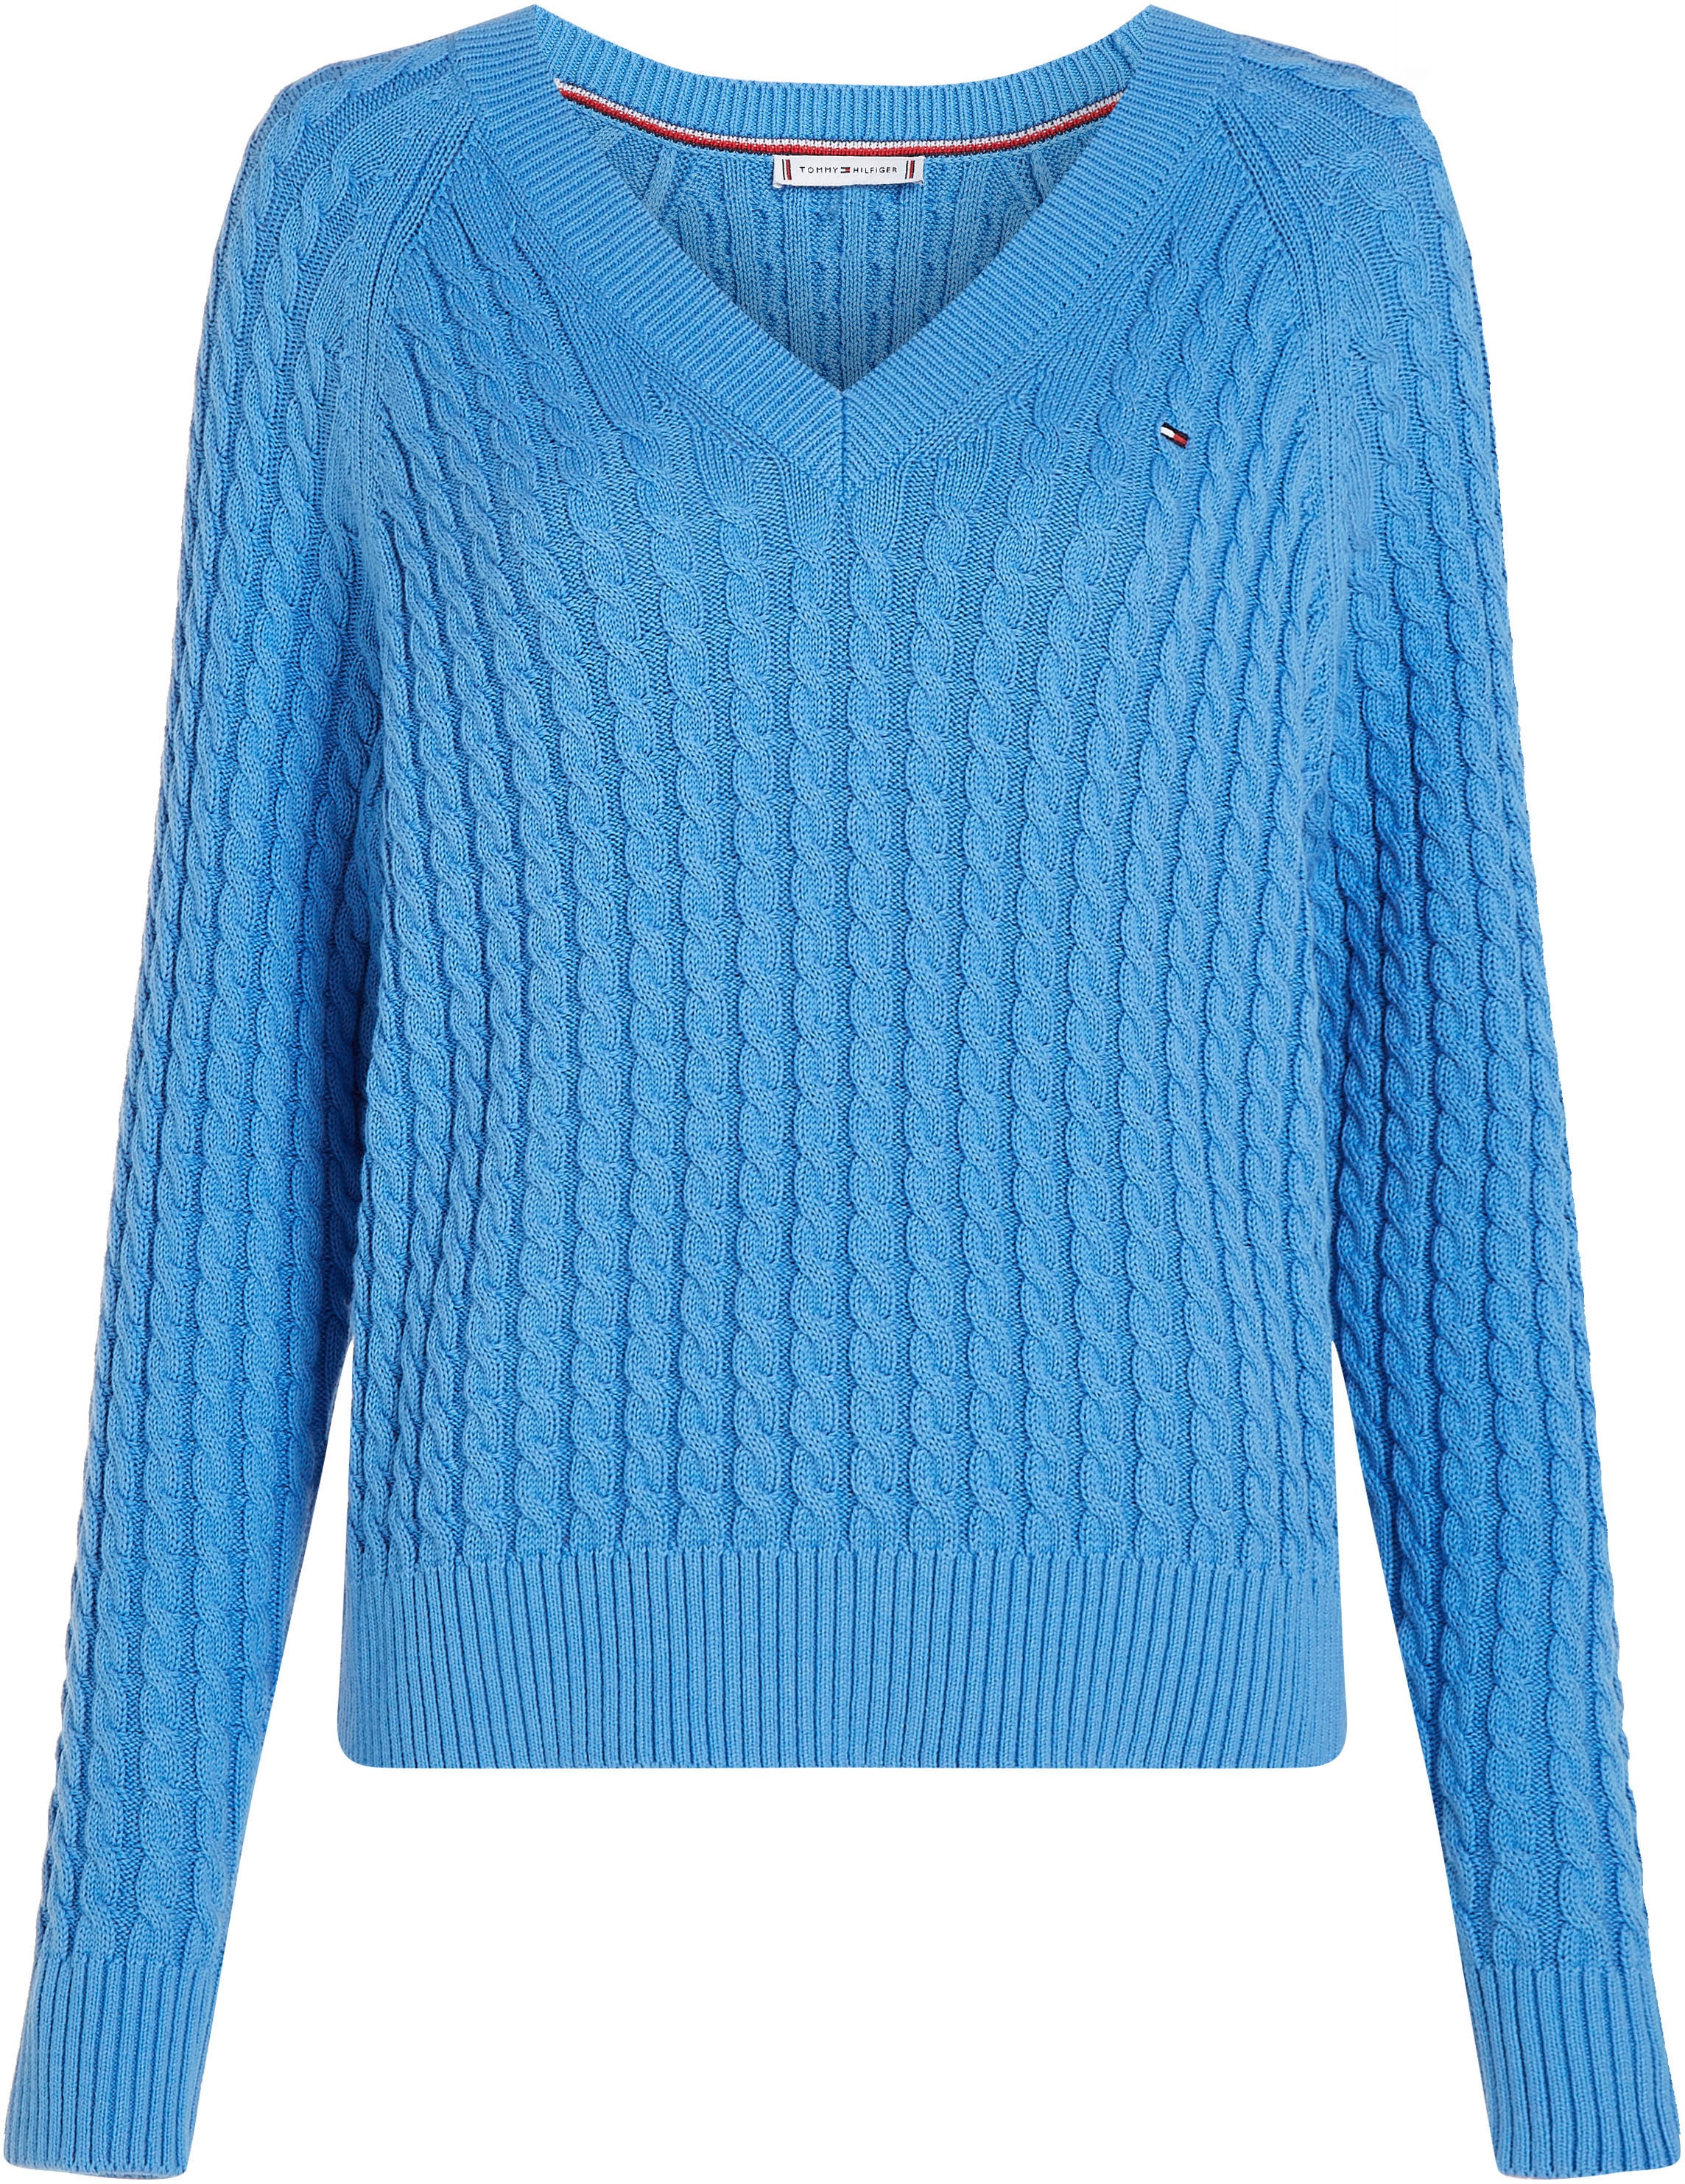 mit CABLE online »CRV SWEATER«, V-Ausschnitt-Pullover OTTO V-NK Hilfiger Curve bei Tommy Logostickerei CO